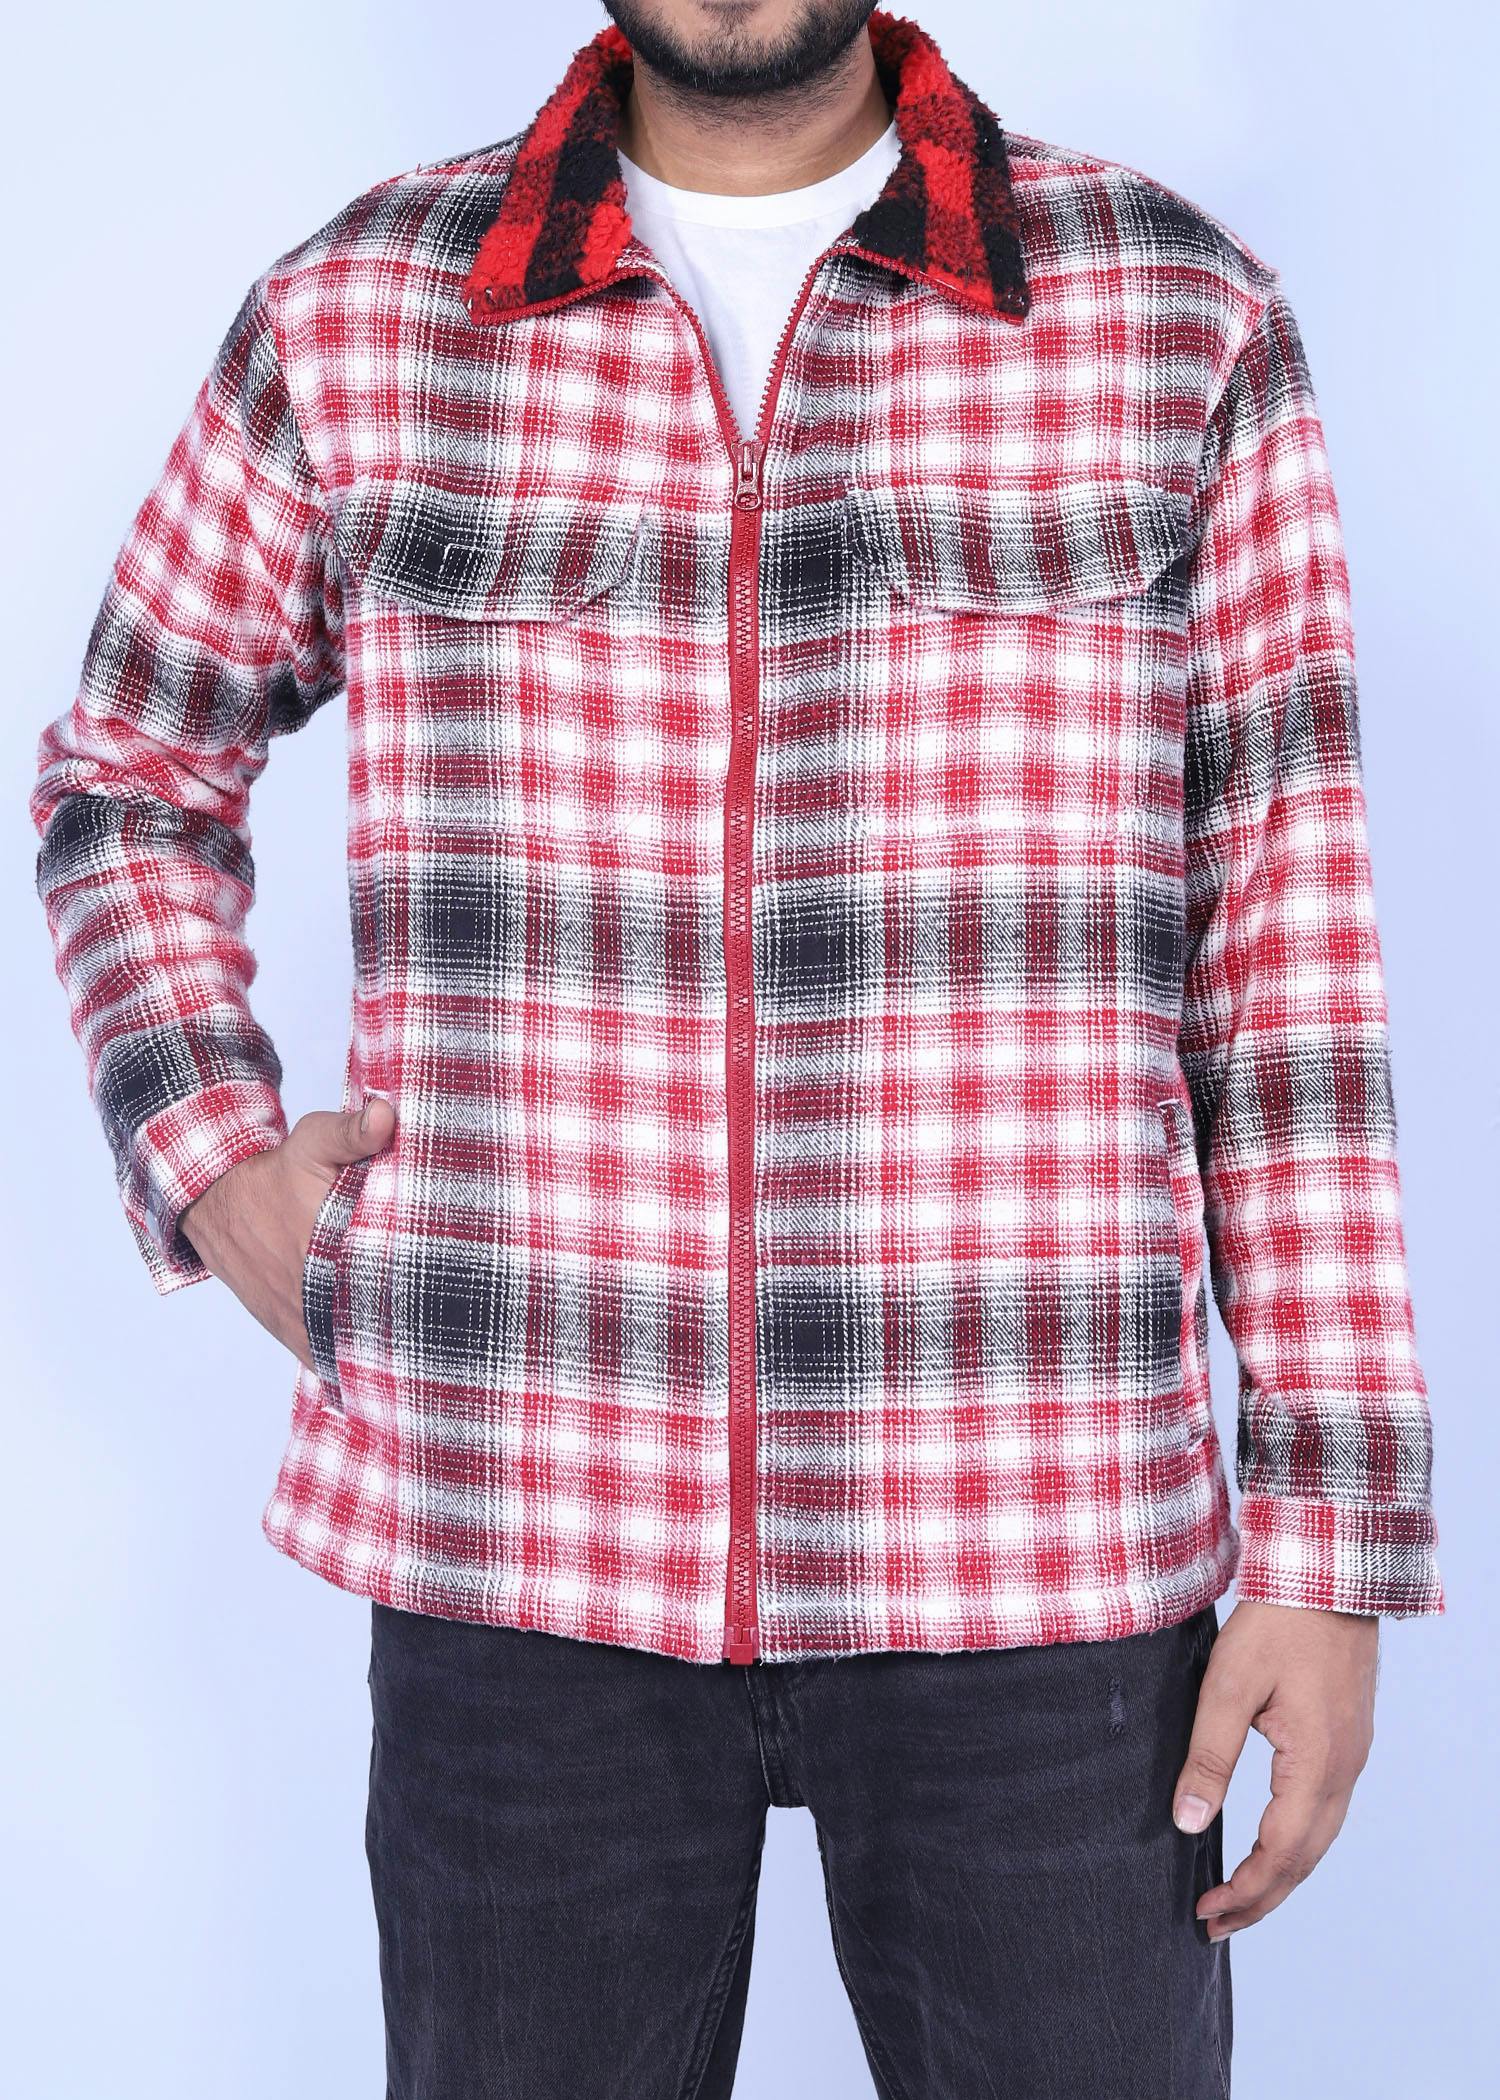 junco i sherpa jacket red check color half front view